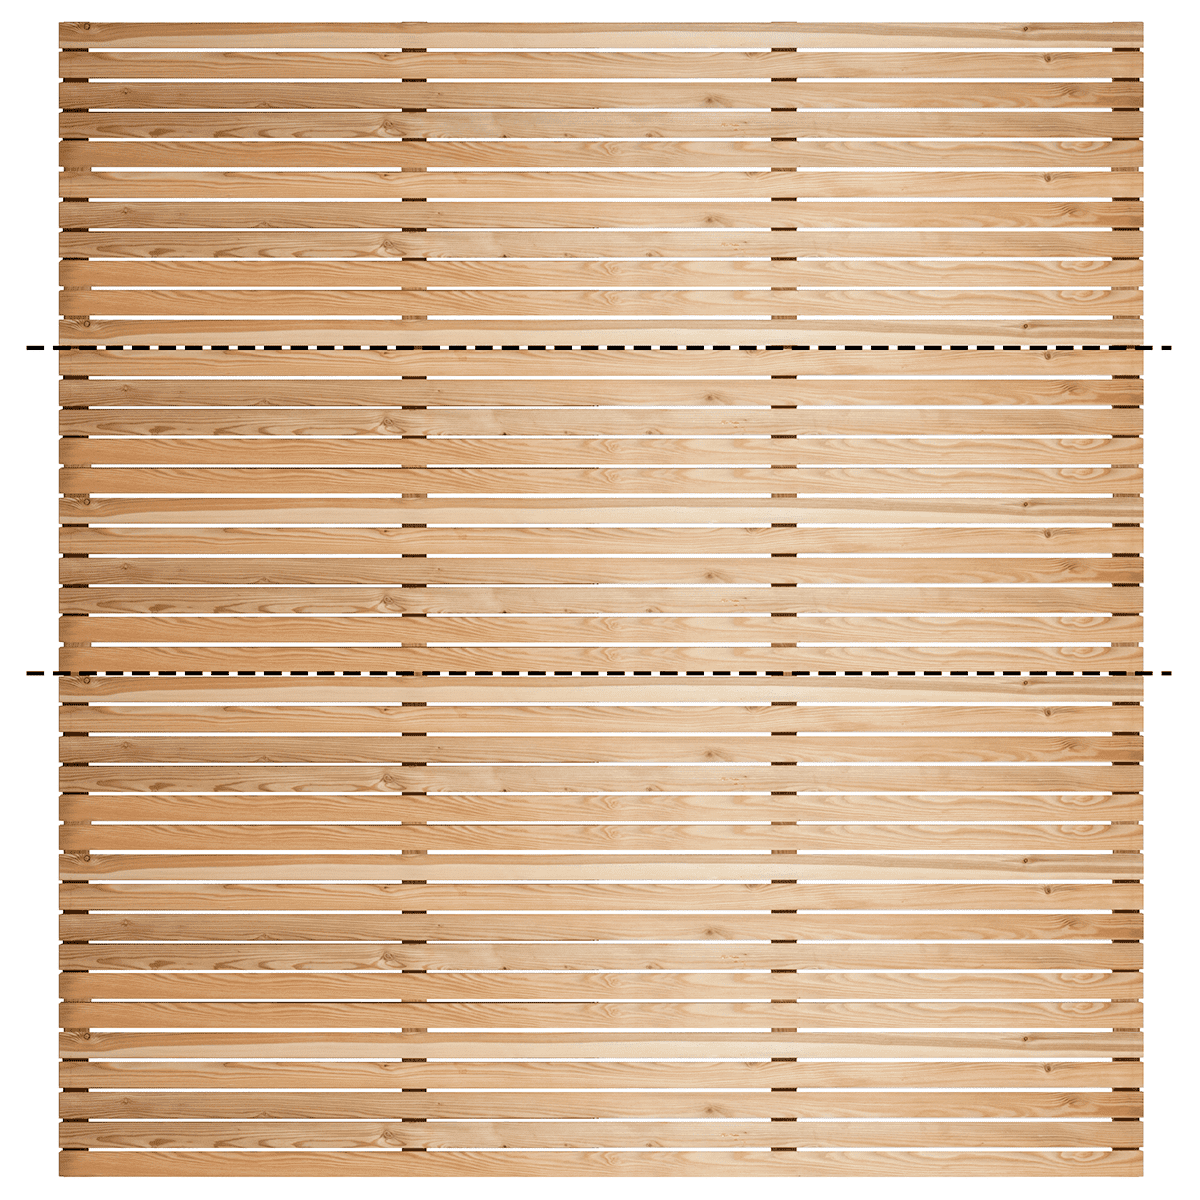 Cequence Slatted Fence Panels - Siberian Larch Slatted Fence Panel 2100mm